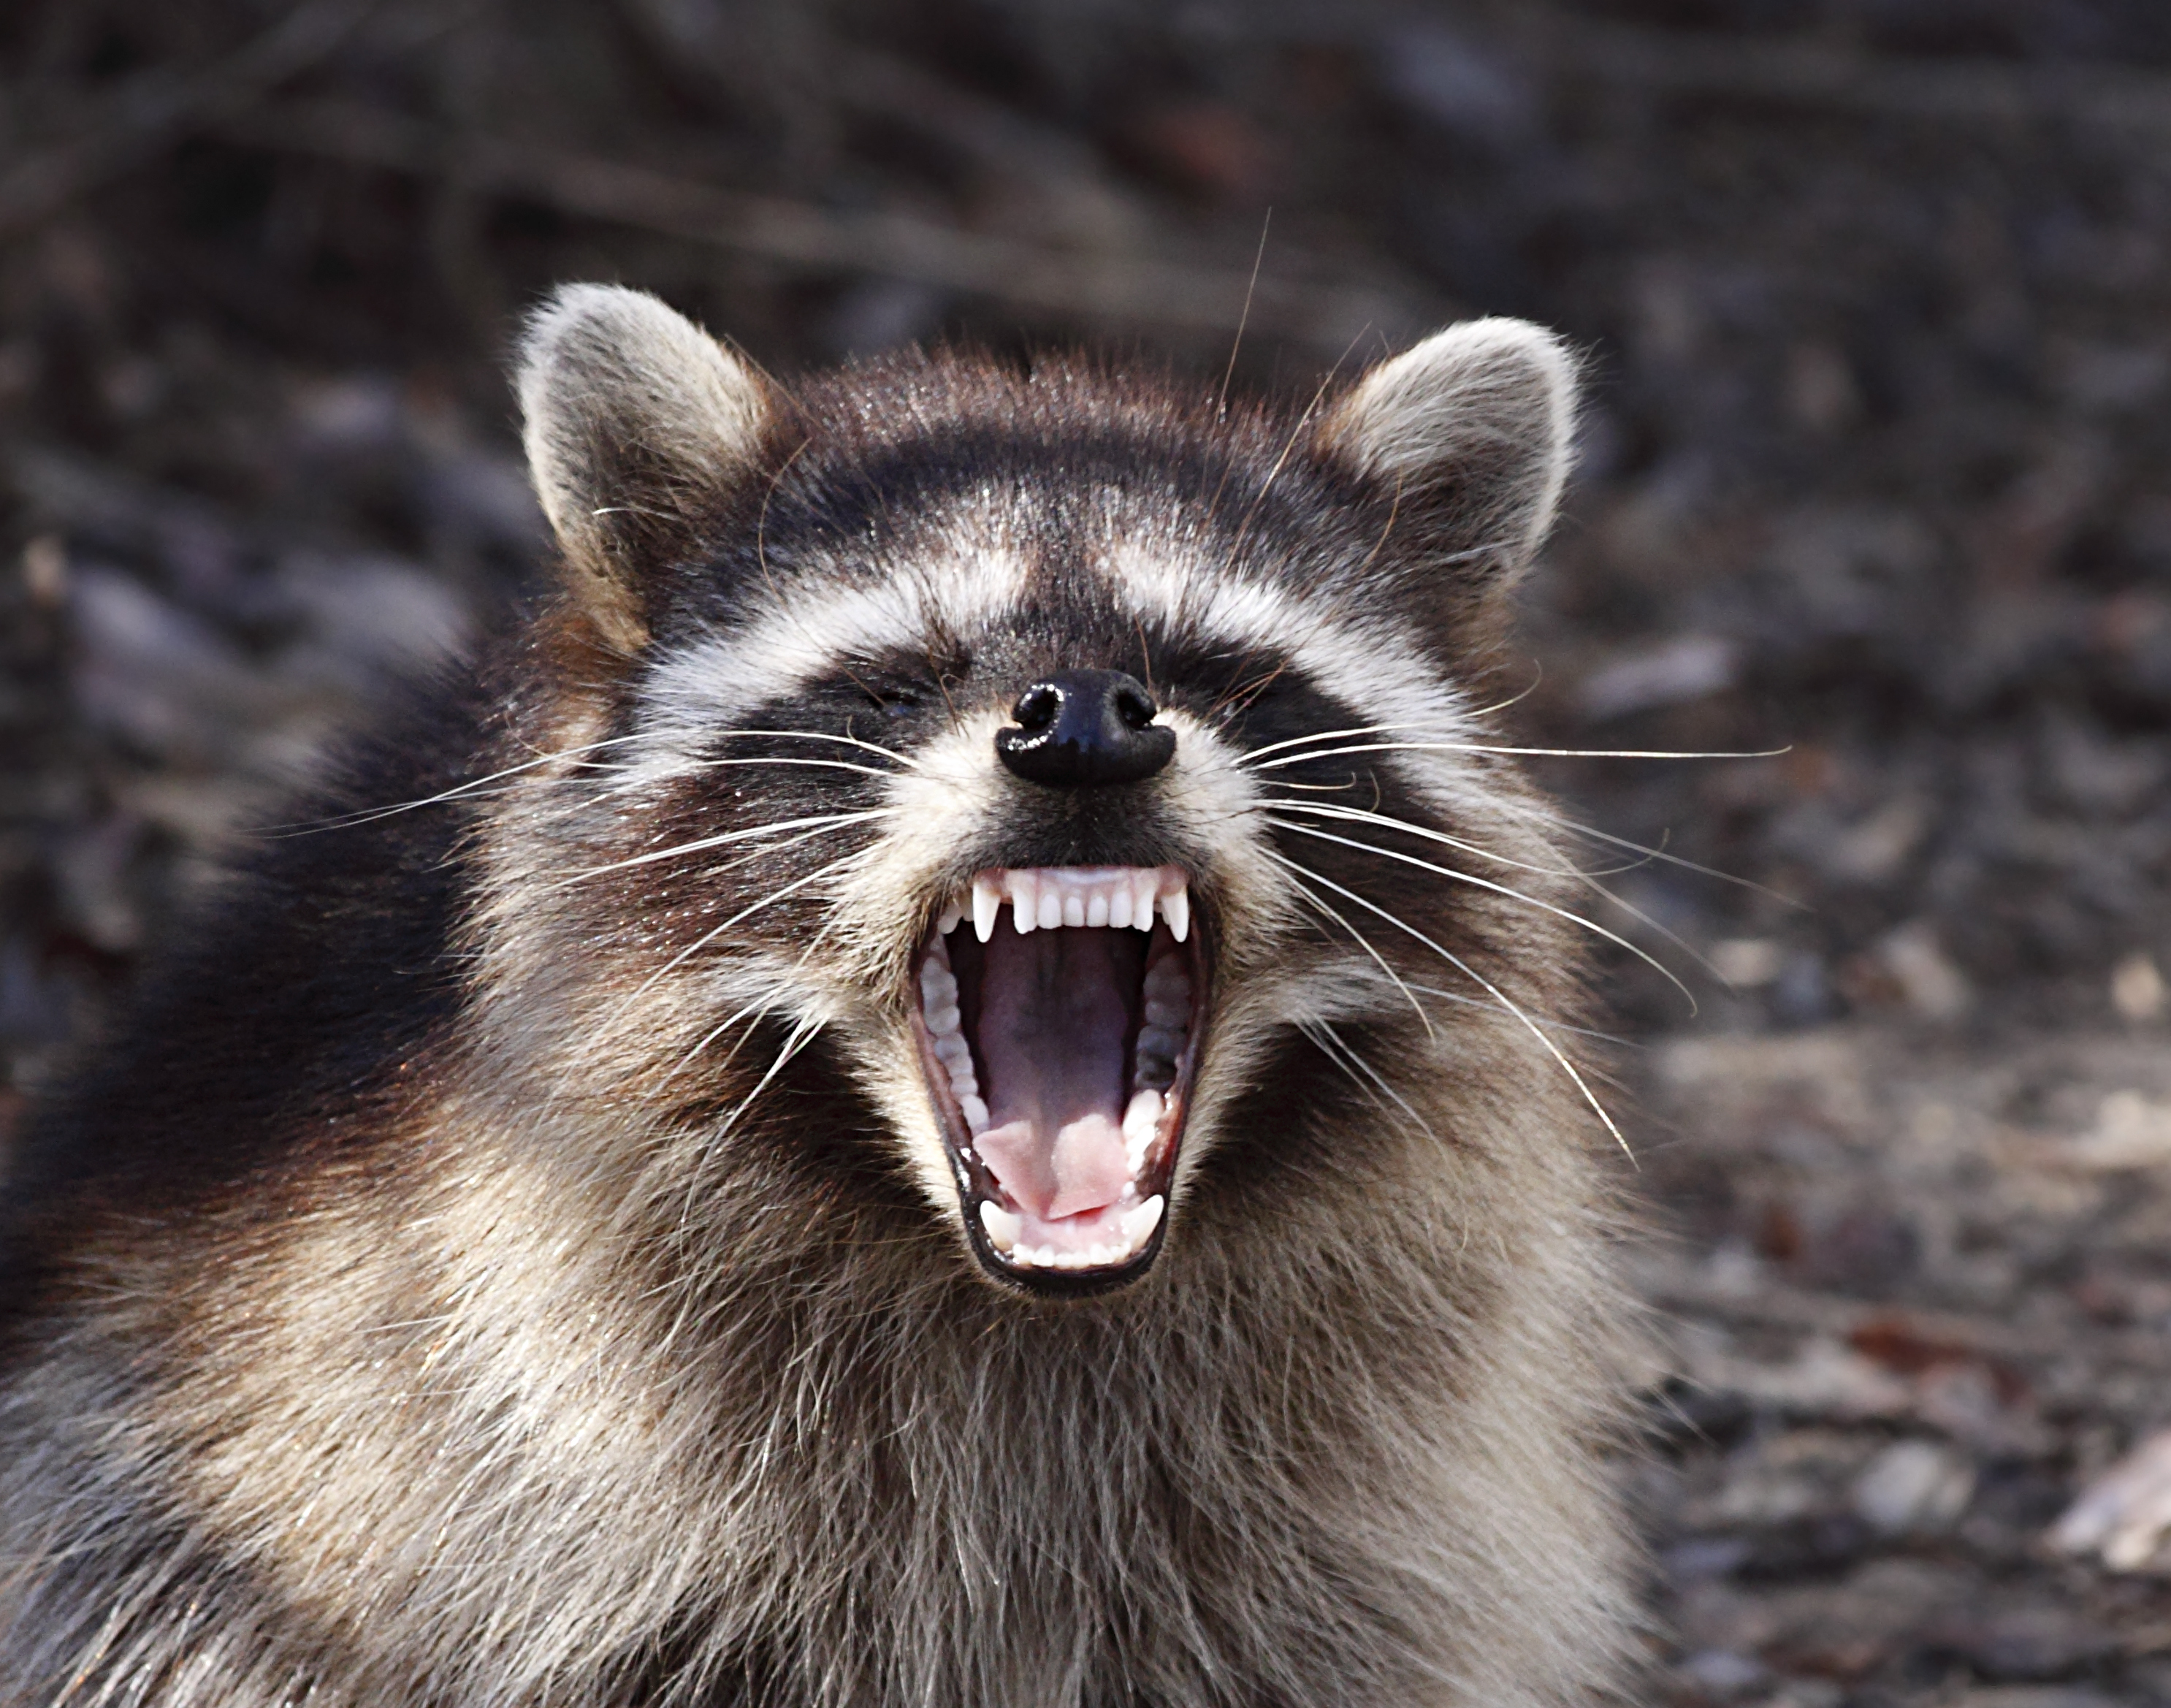 Raccoon near Guadalupe, California (Alan Vernon—Getty Images)